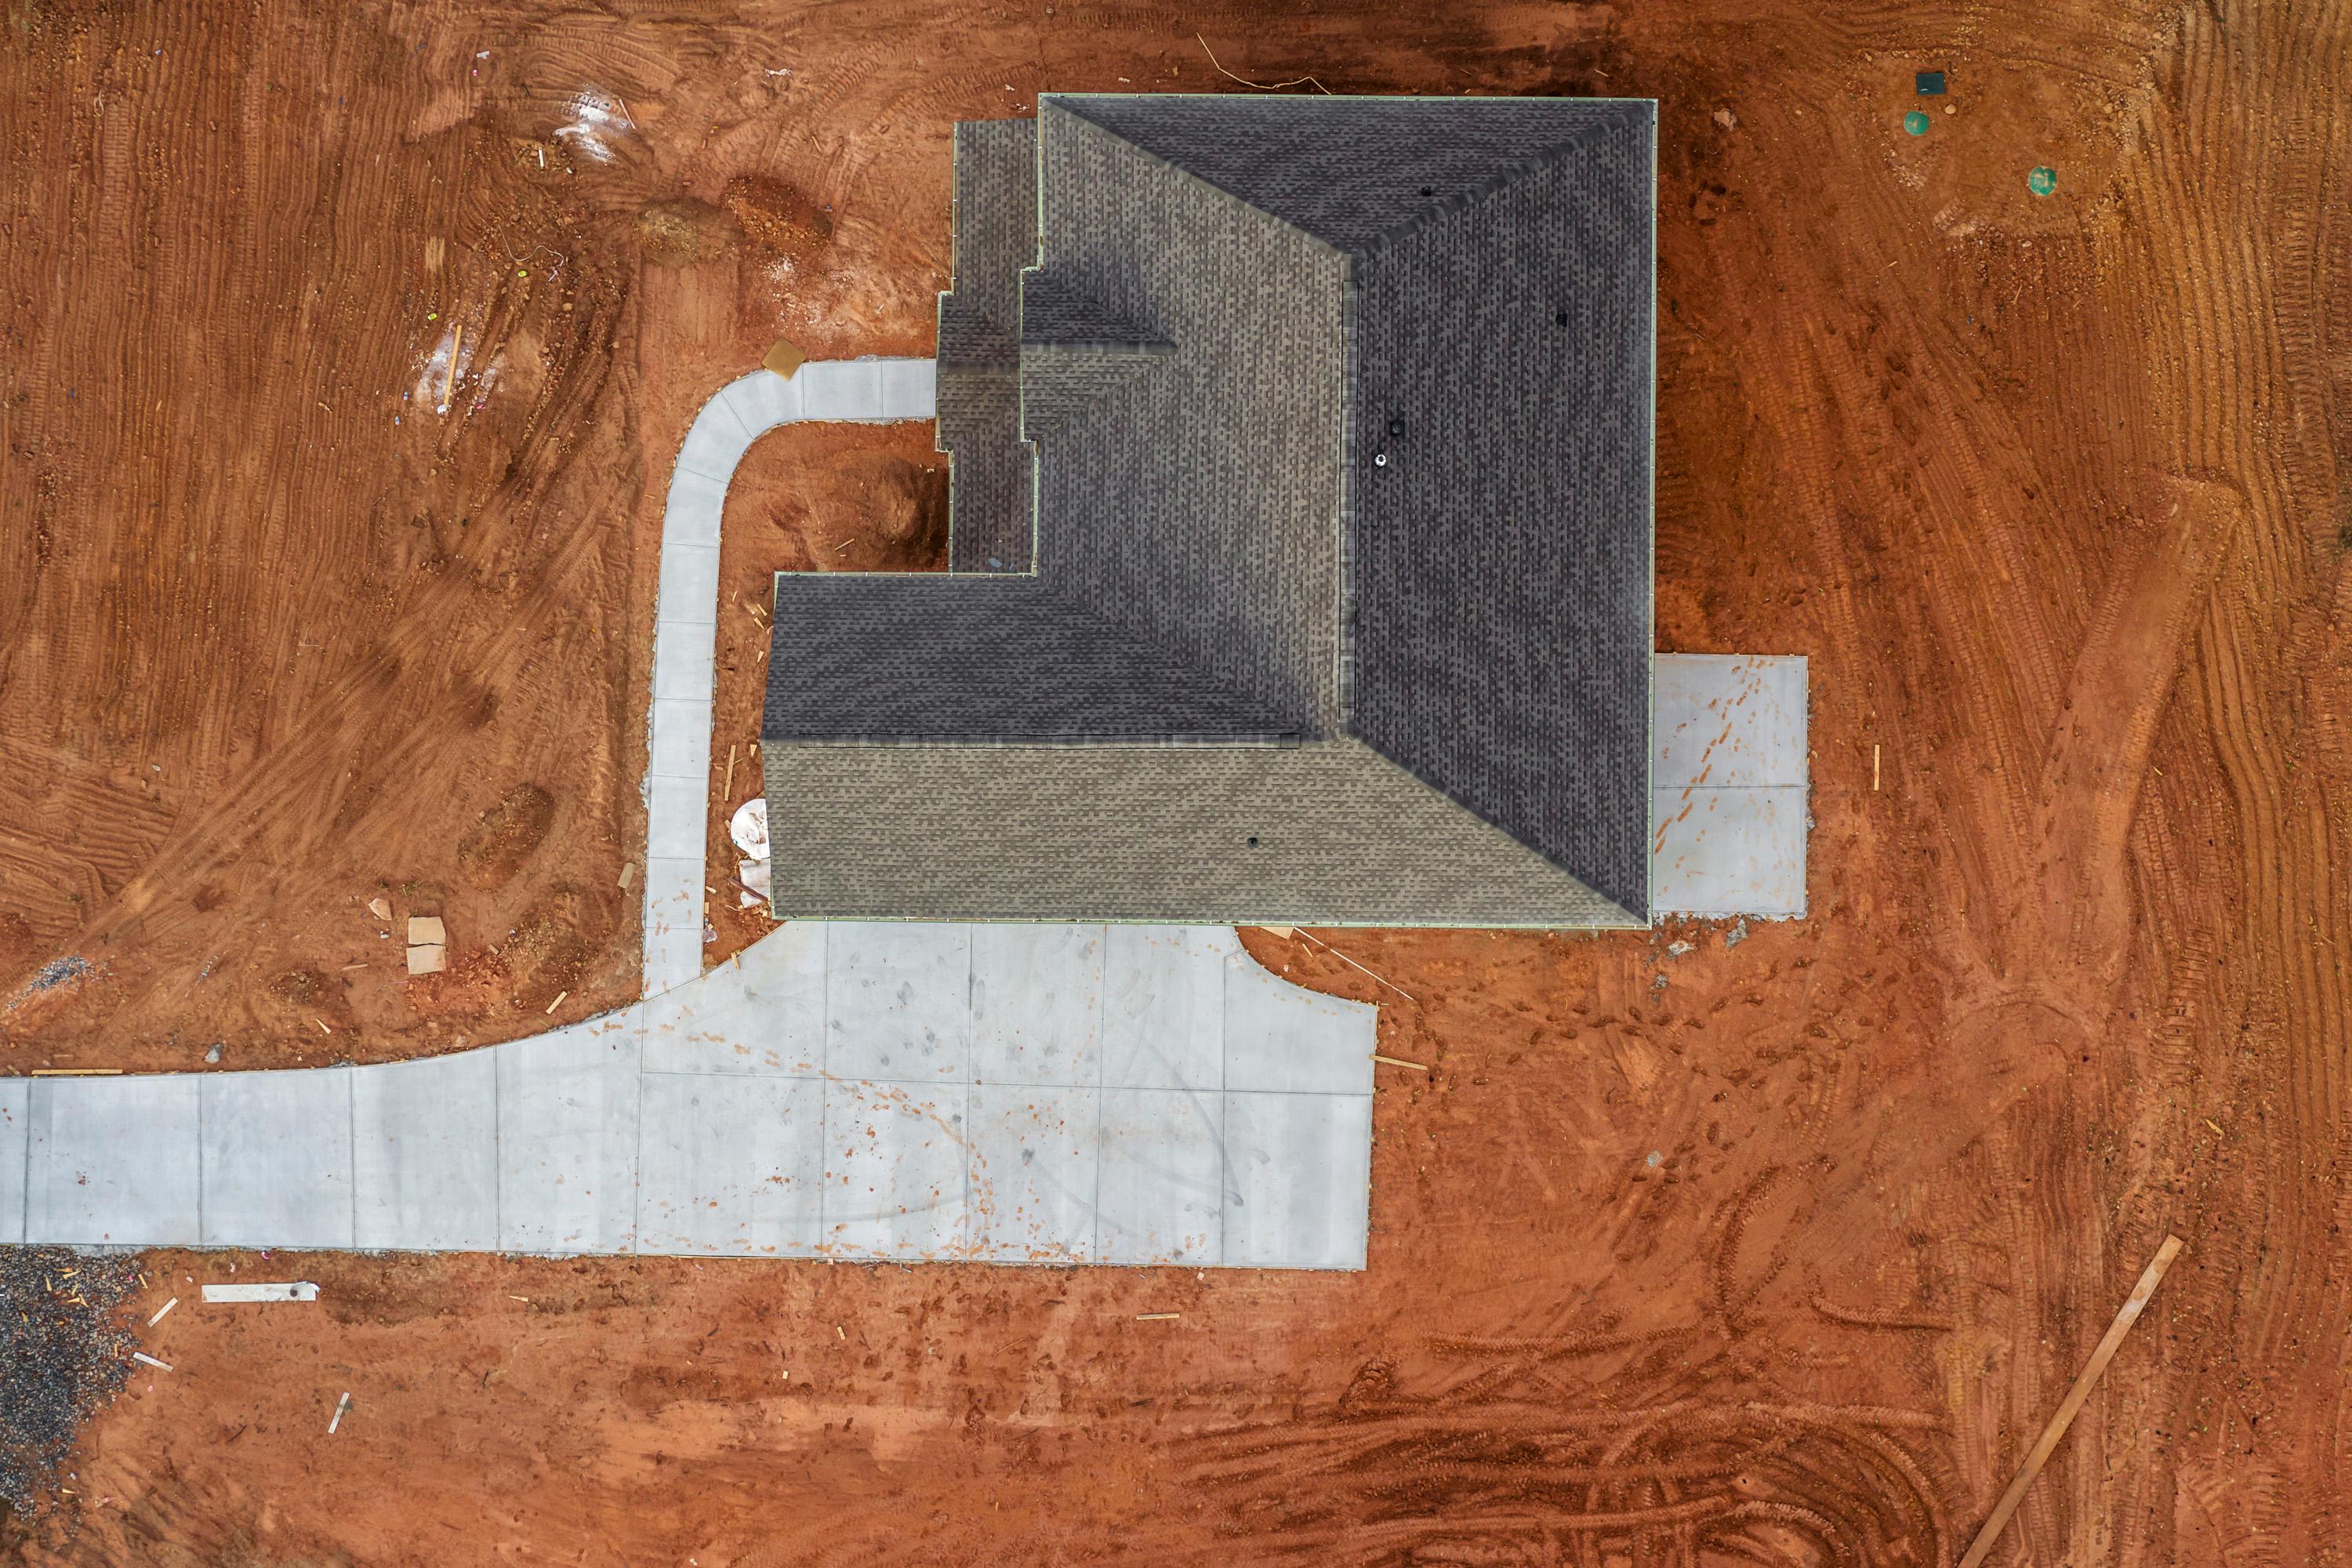 Peter Essick Abstract Photograph - "Construction Site, Mountain Park #2" Aerial Landscape Photography - Ansel Adams